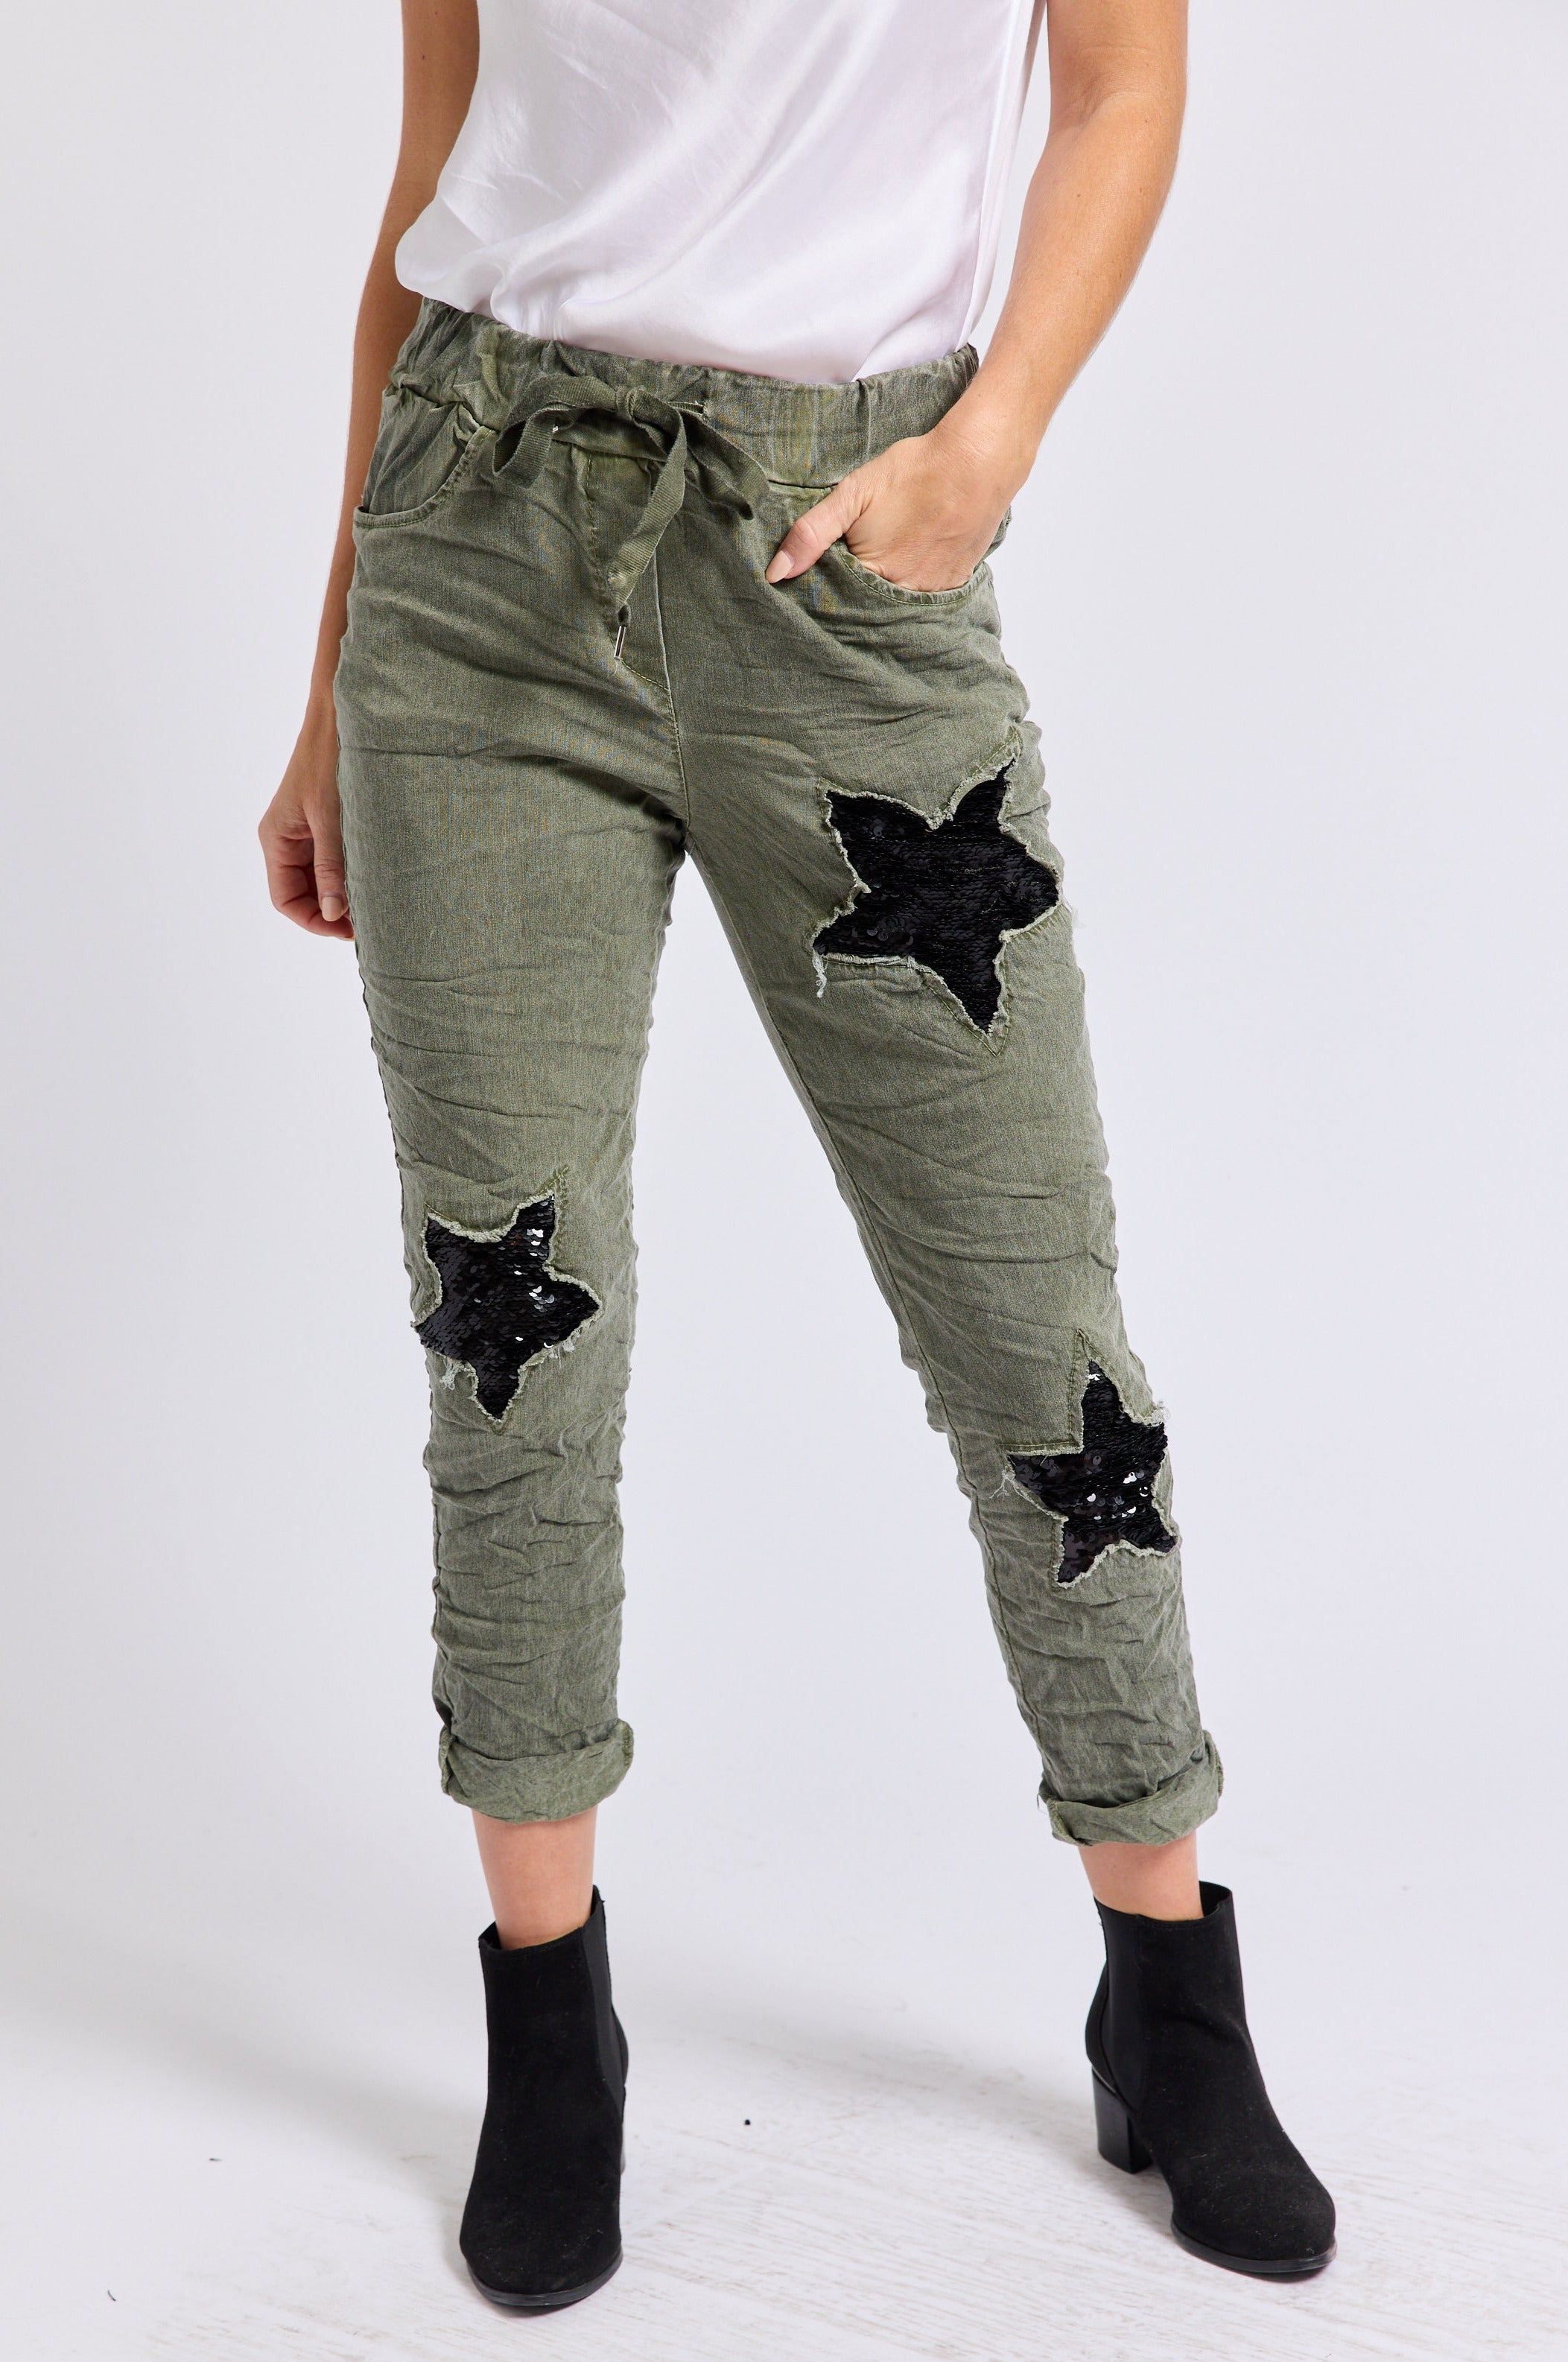 Sequin Star Italian Stretch Pant - Jacqueline B Clothing